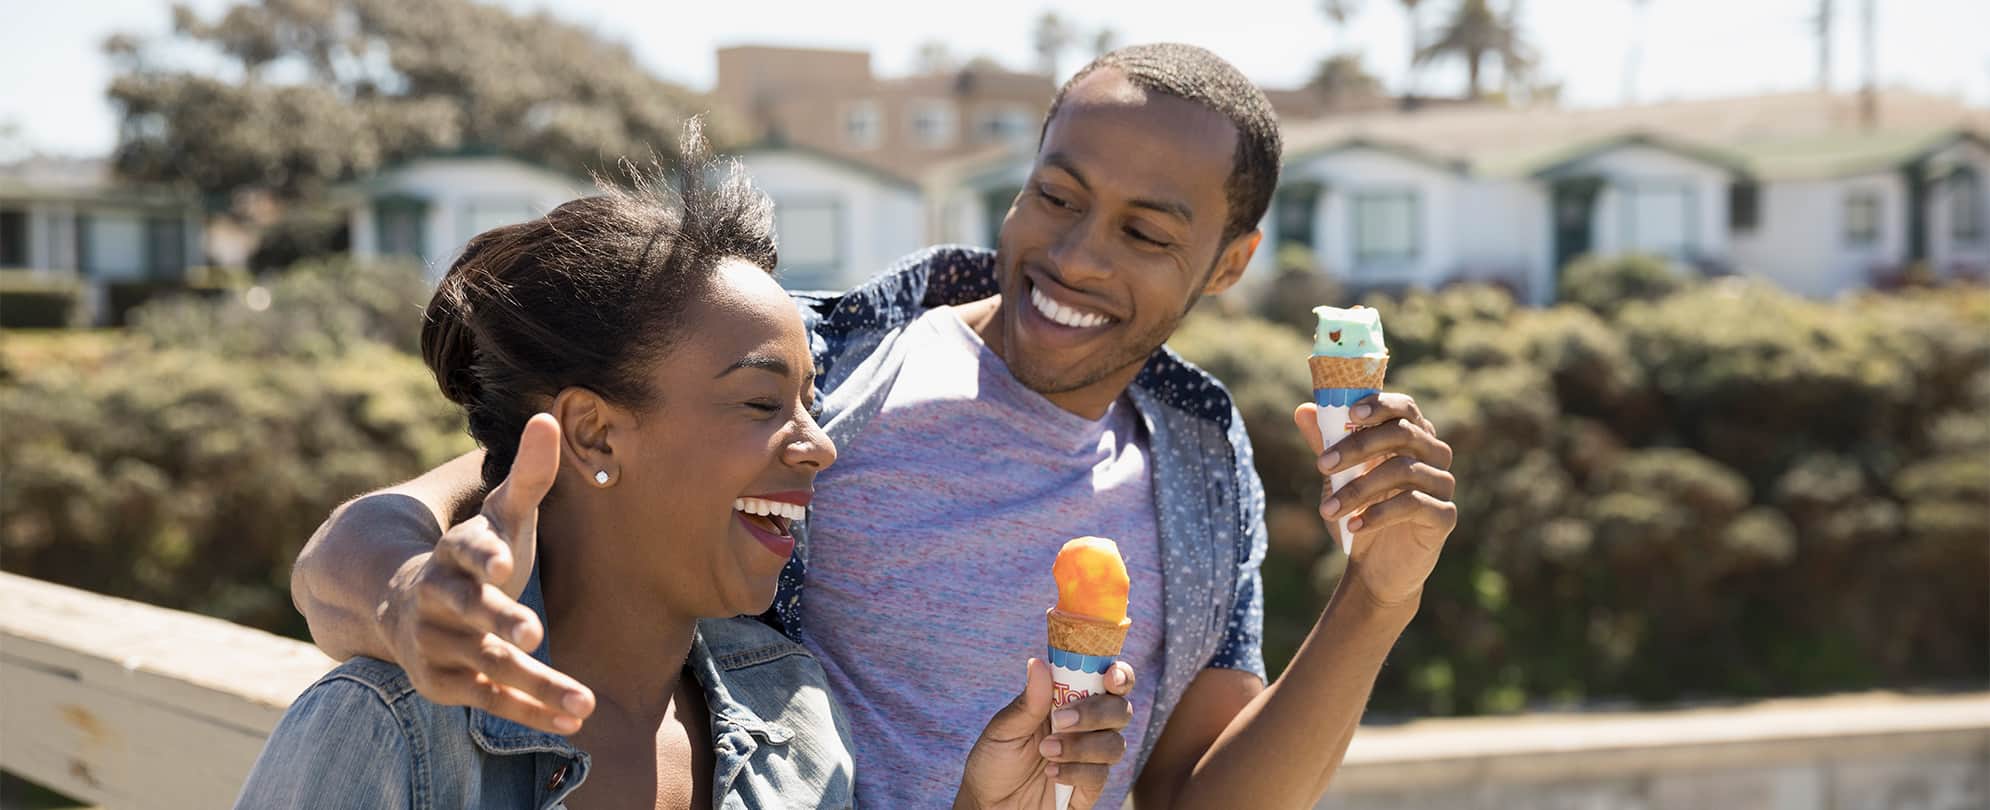 A man leisurely walks with his arm around a woman’s shoulder, they are both smiling and holding ice cream cones.